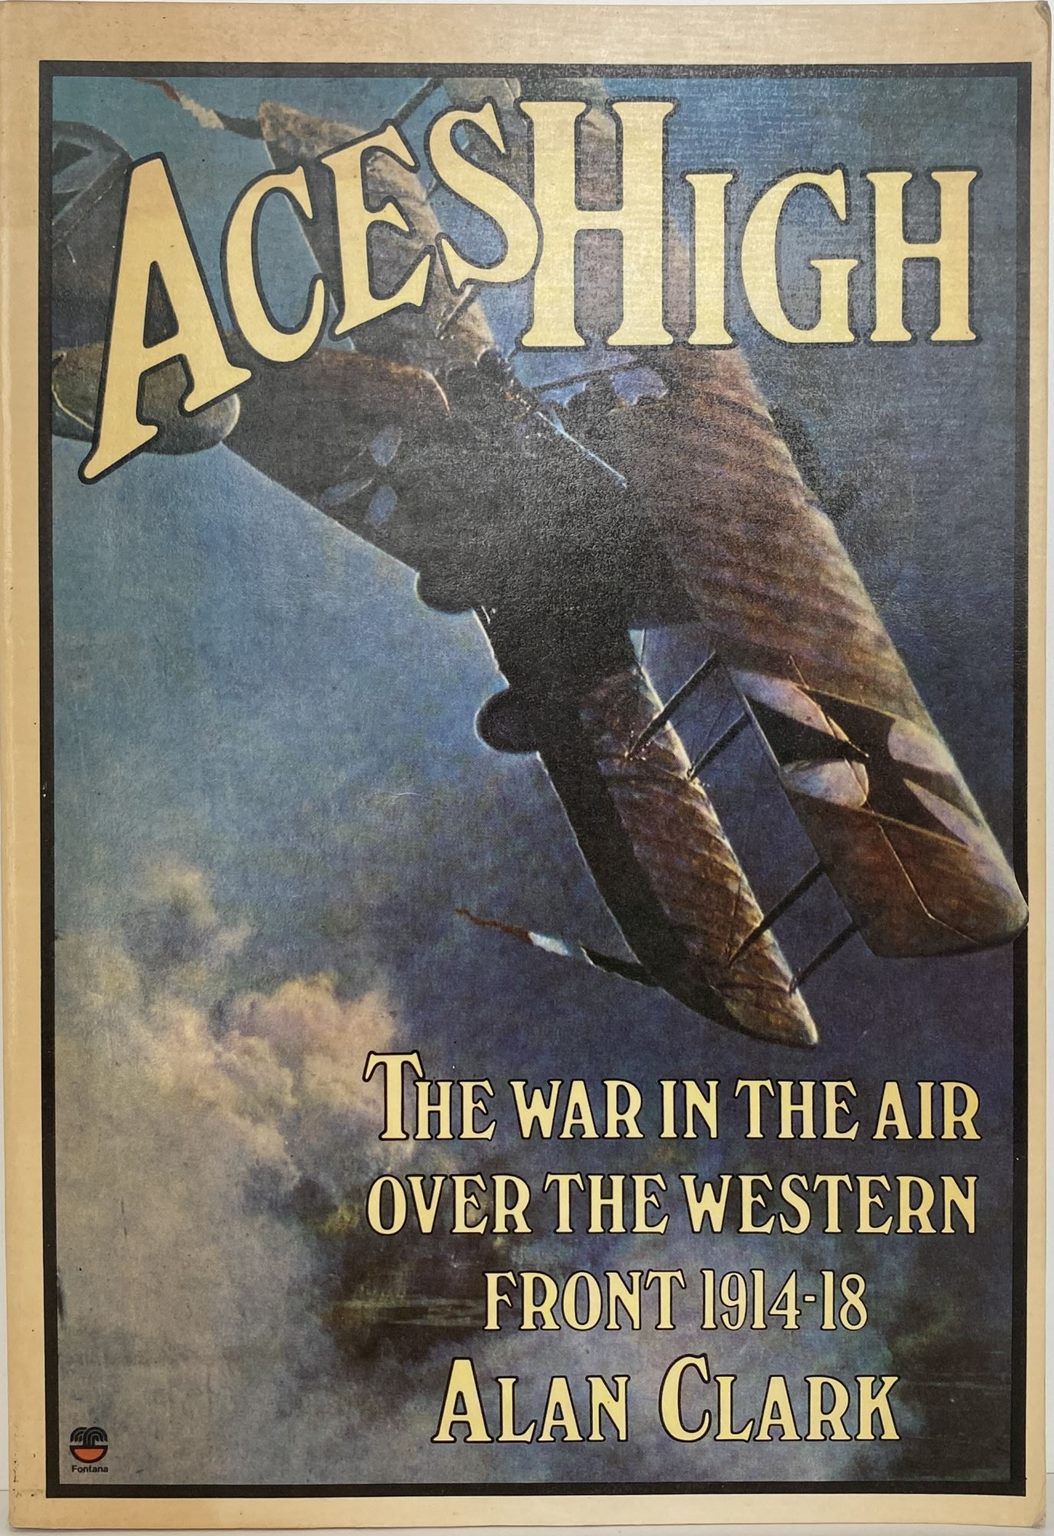 ACES HIGH: The War in the Air over the Western Front 1914-18